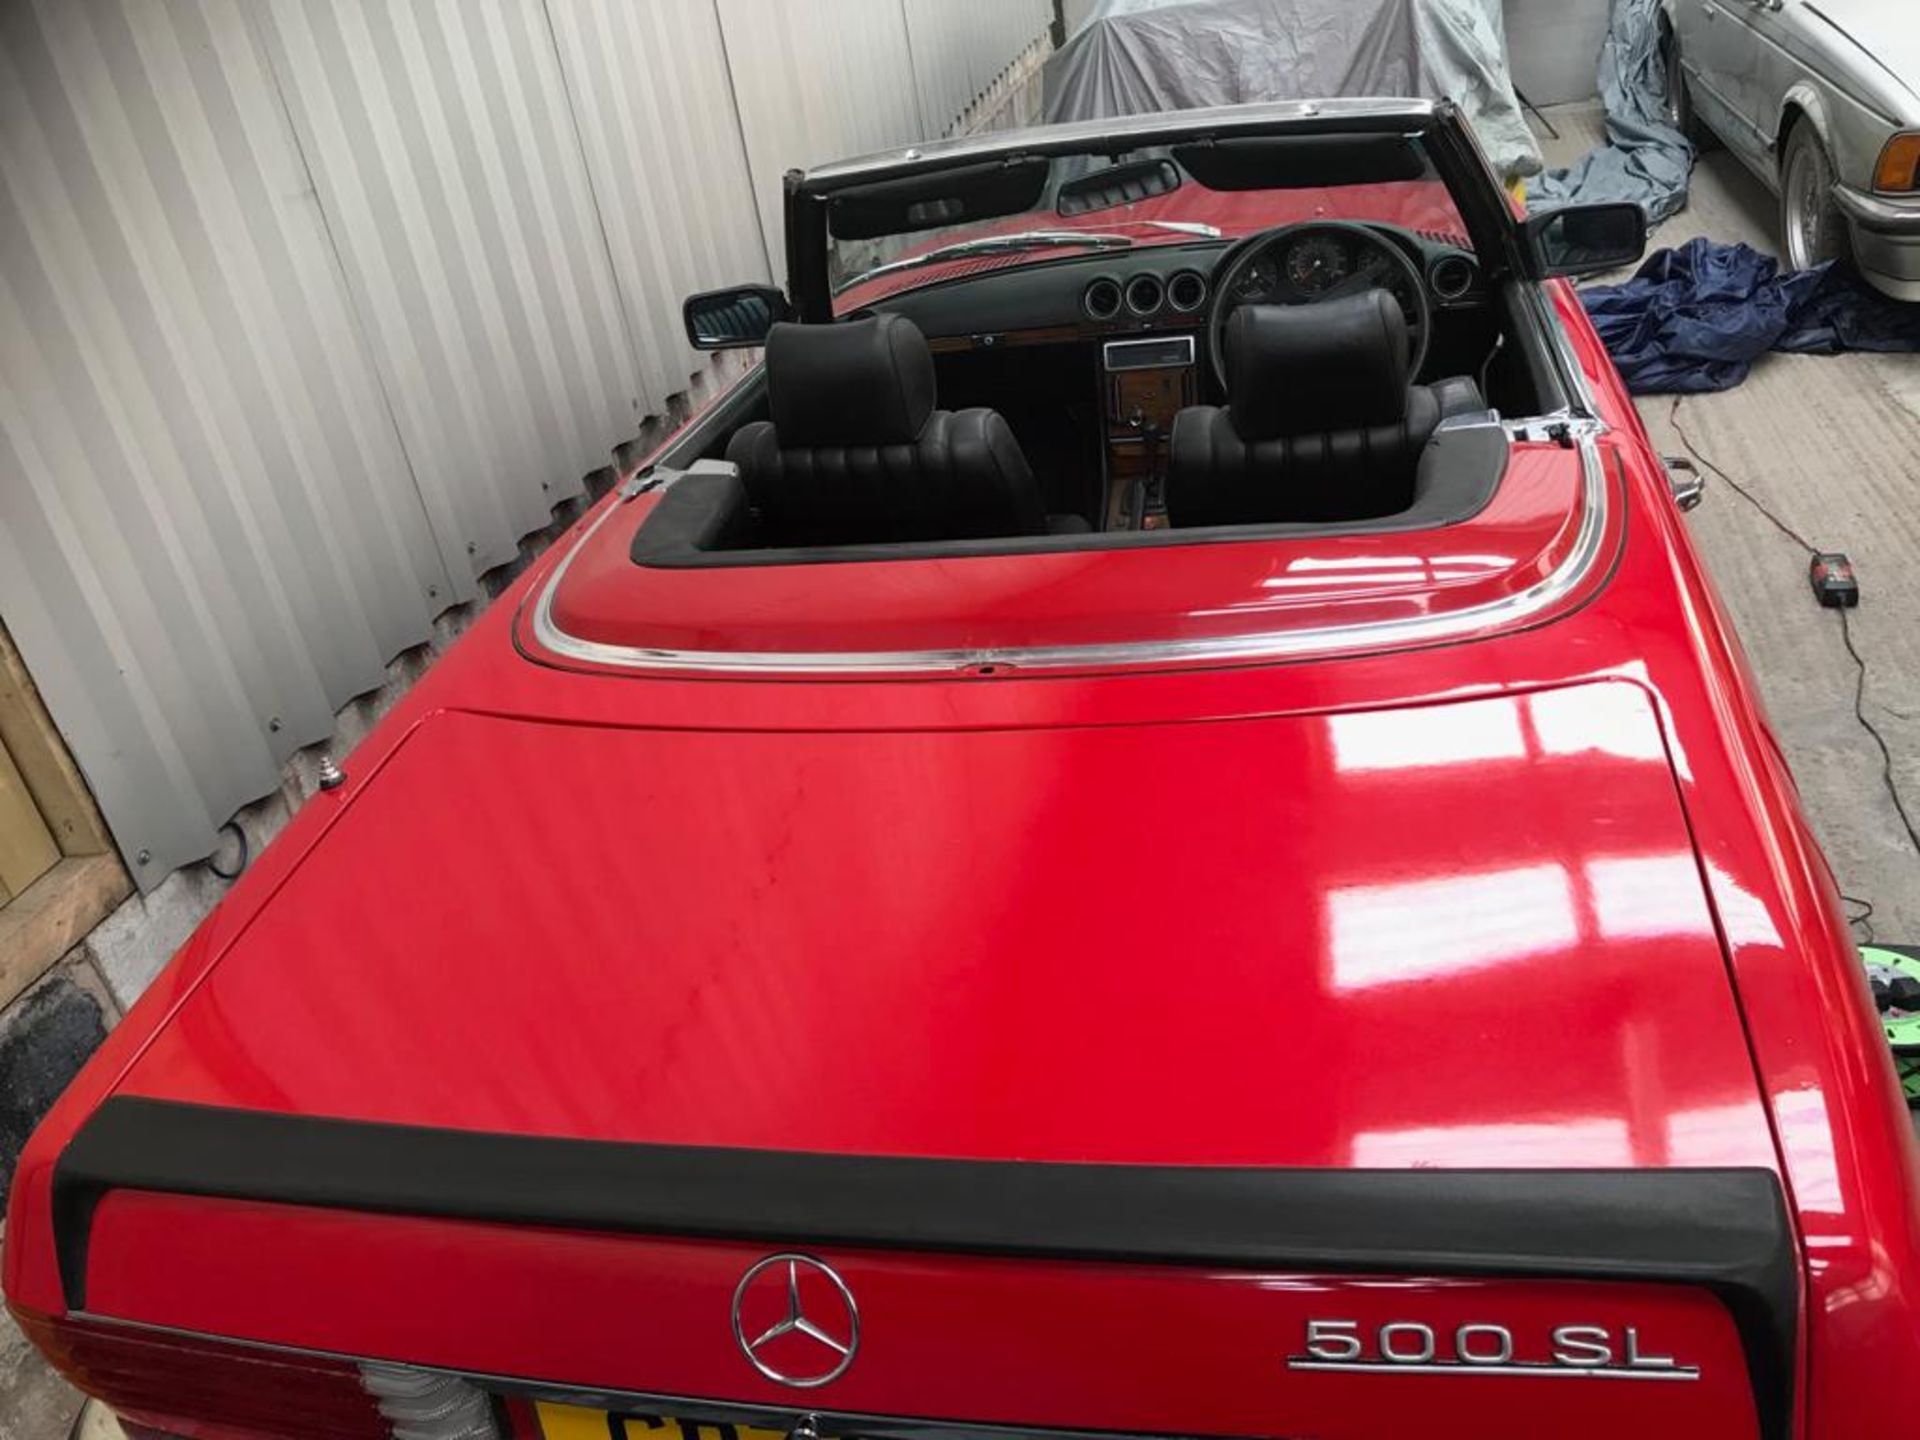 Mercedes 500SL R107 - 69,938 Miles - CL331 - Location: Manchester - No VAT on the hammer! This 500SL - Image 10 of 11